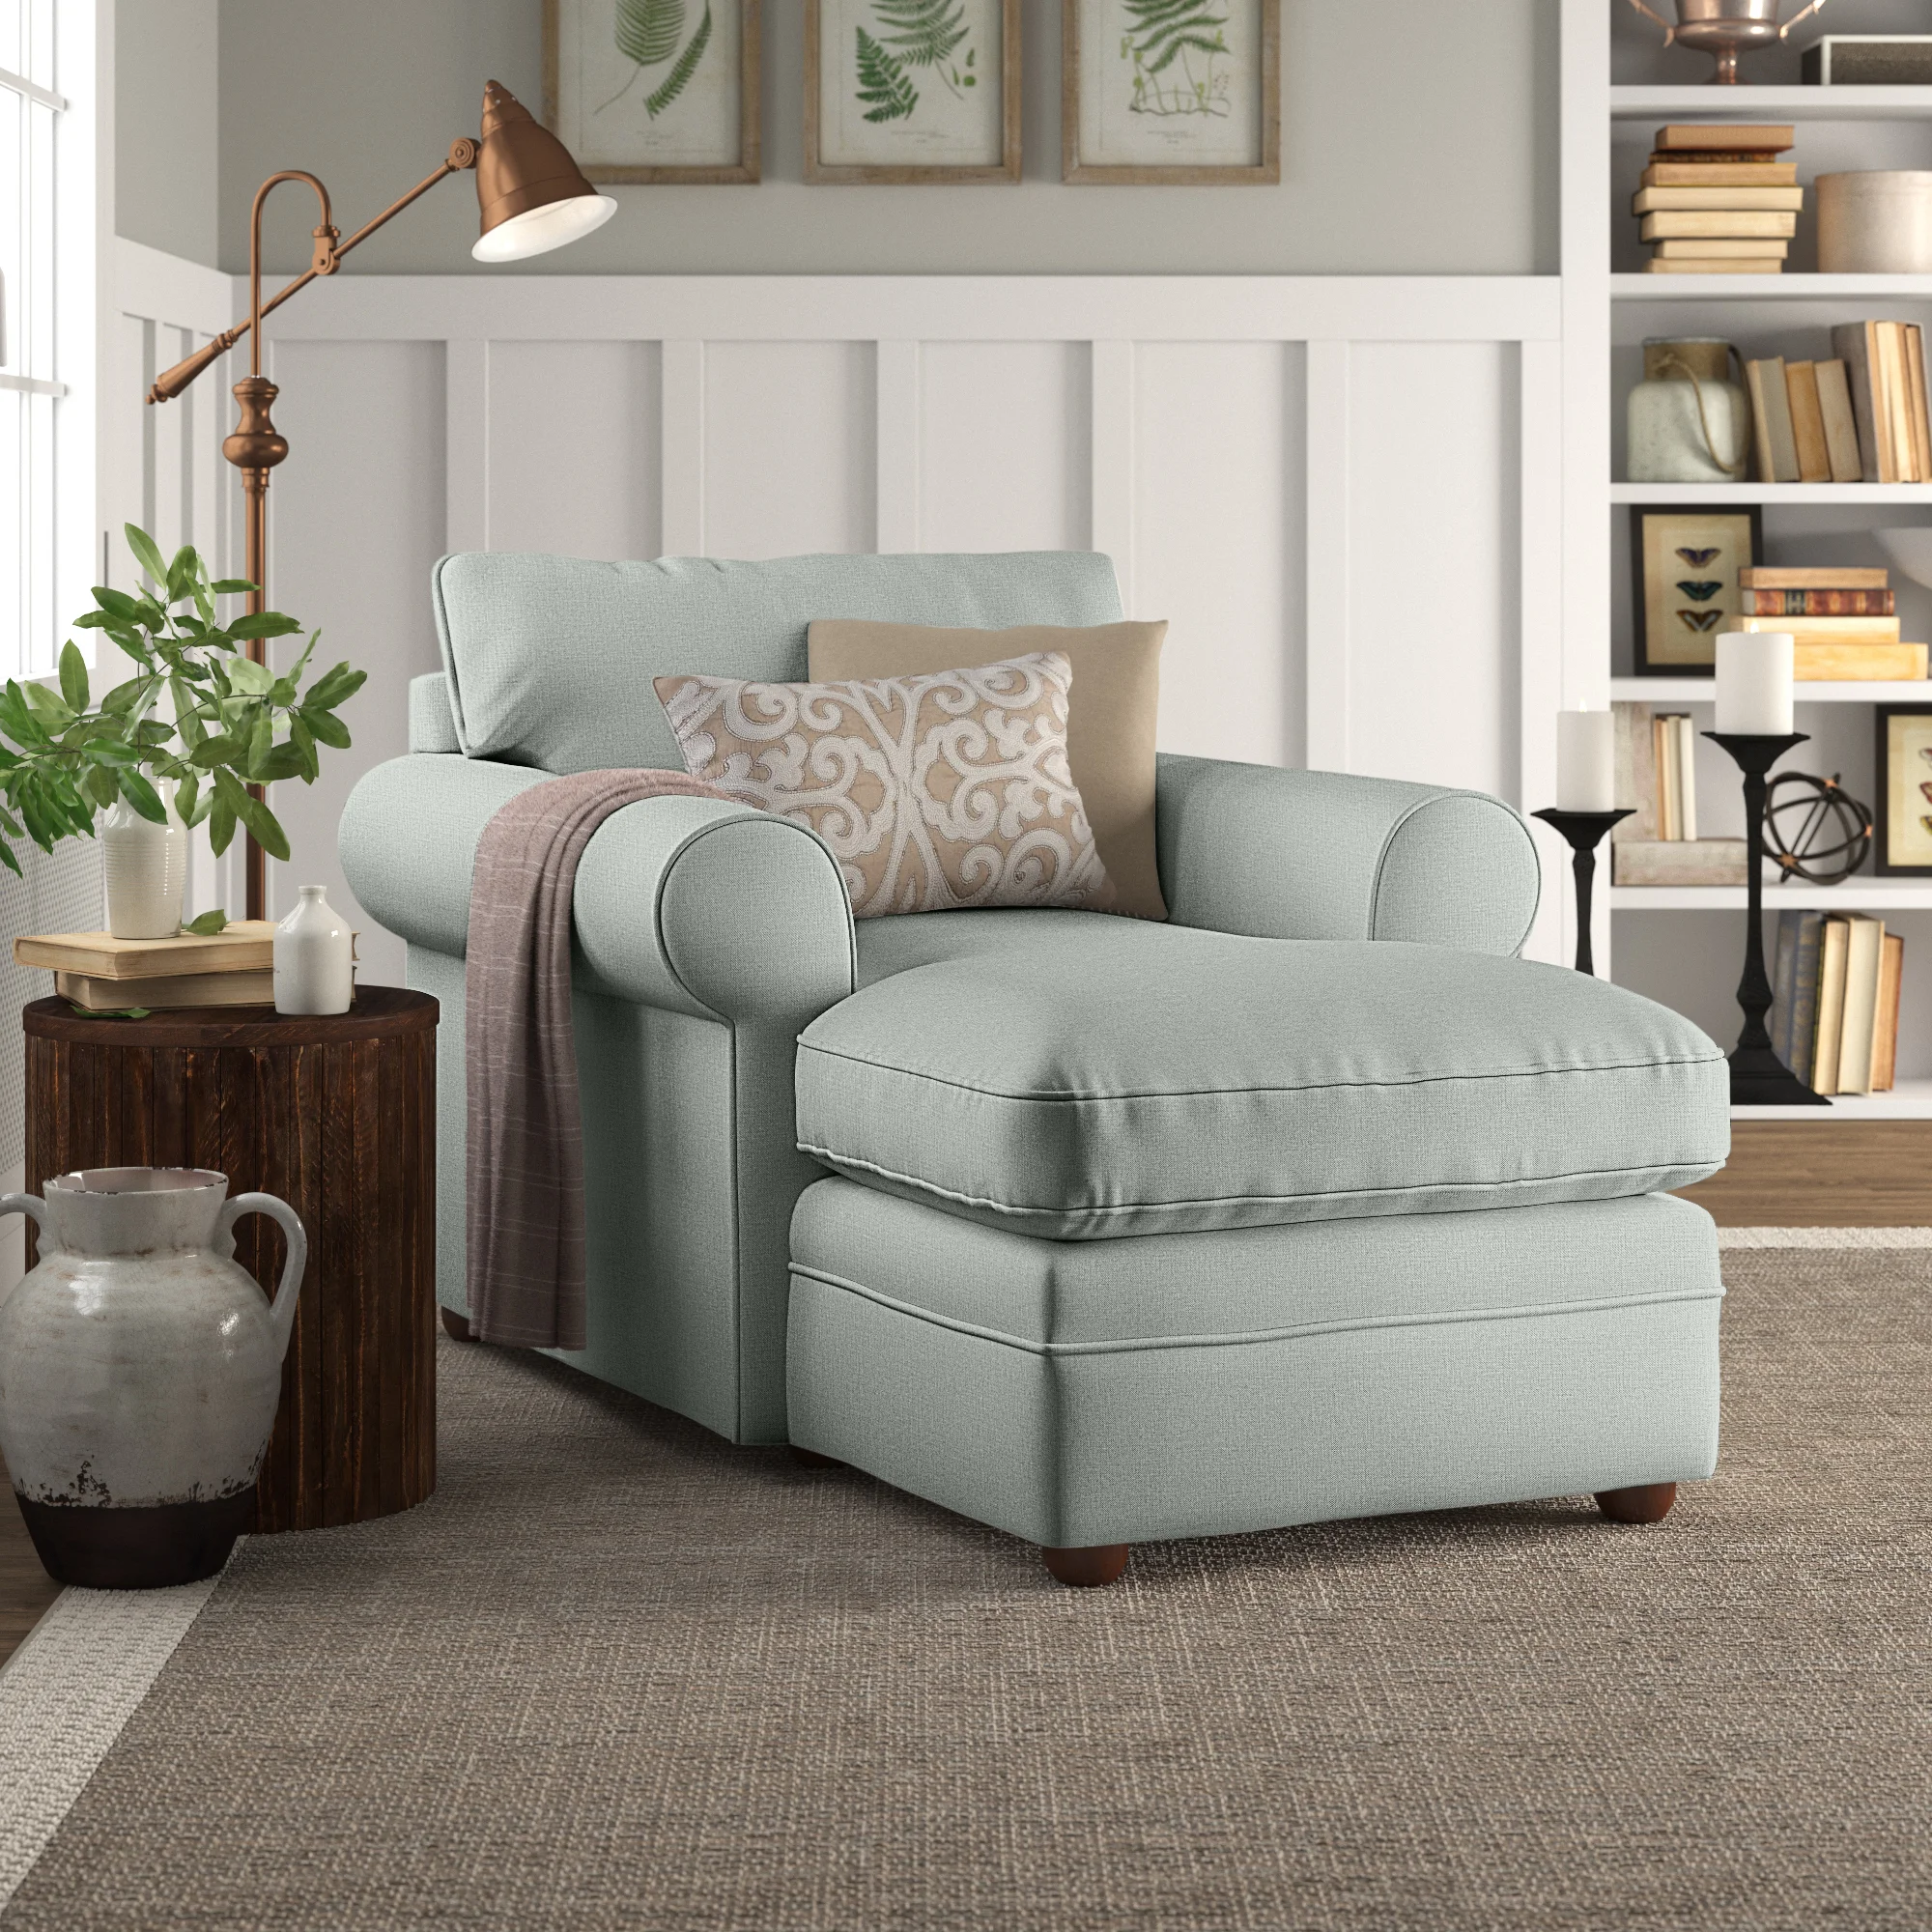 Wayfair Prime Day Clearance Event 2021: Best Living Room Deals